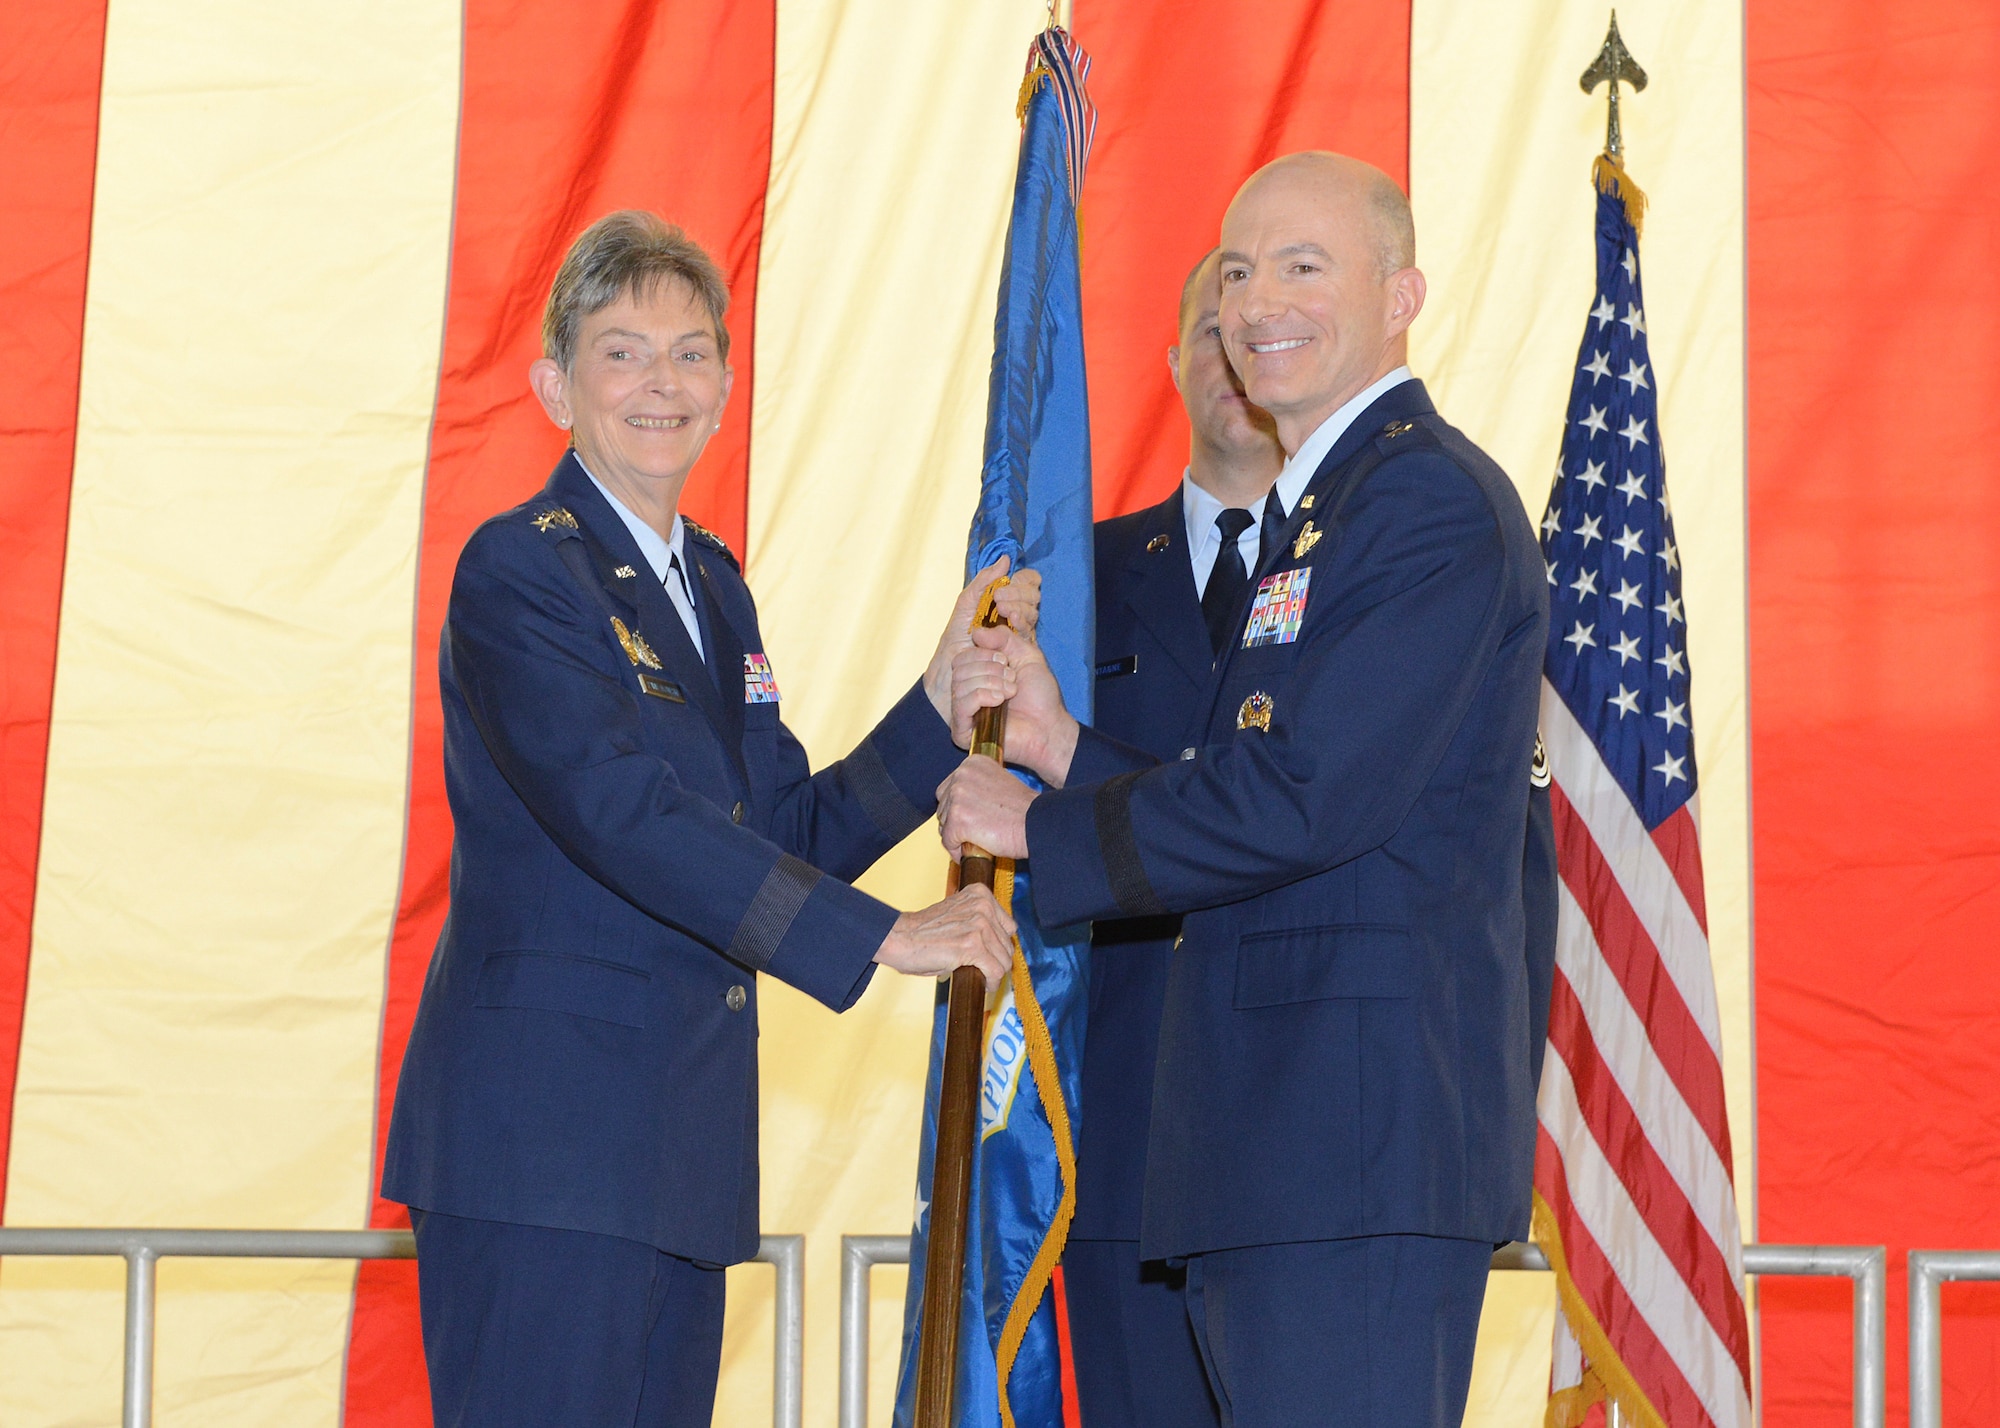 Brig. Gen. Christopher P. Azzano poses with the Air Force Test Center guidon with the commander of Air Force Materiel Command, Gen. Ellen Pawlikowski, during a change-of-command held in Hangar 1600 at Edwards Air Force Base, Aug. 3. (U.S. Air Force photo by Kenji Thuloweit)